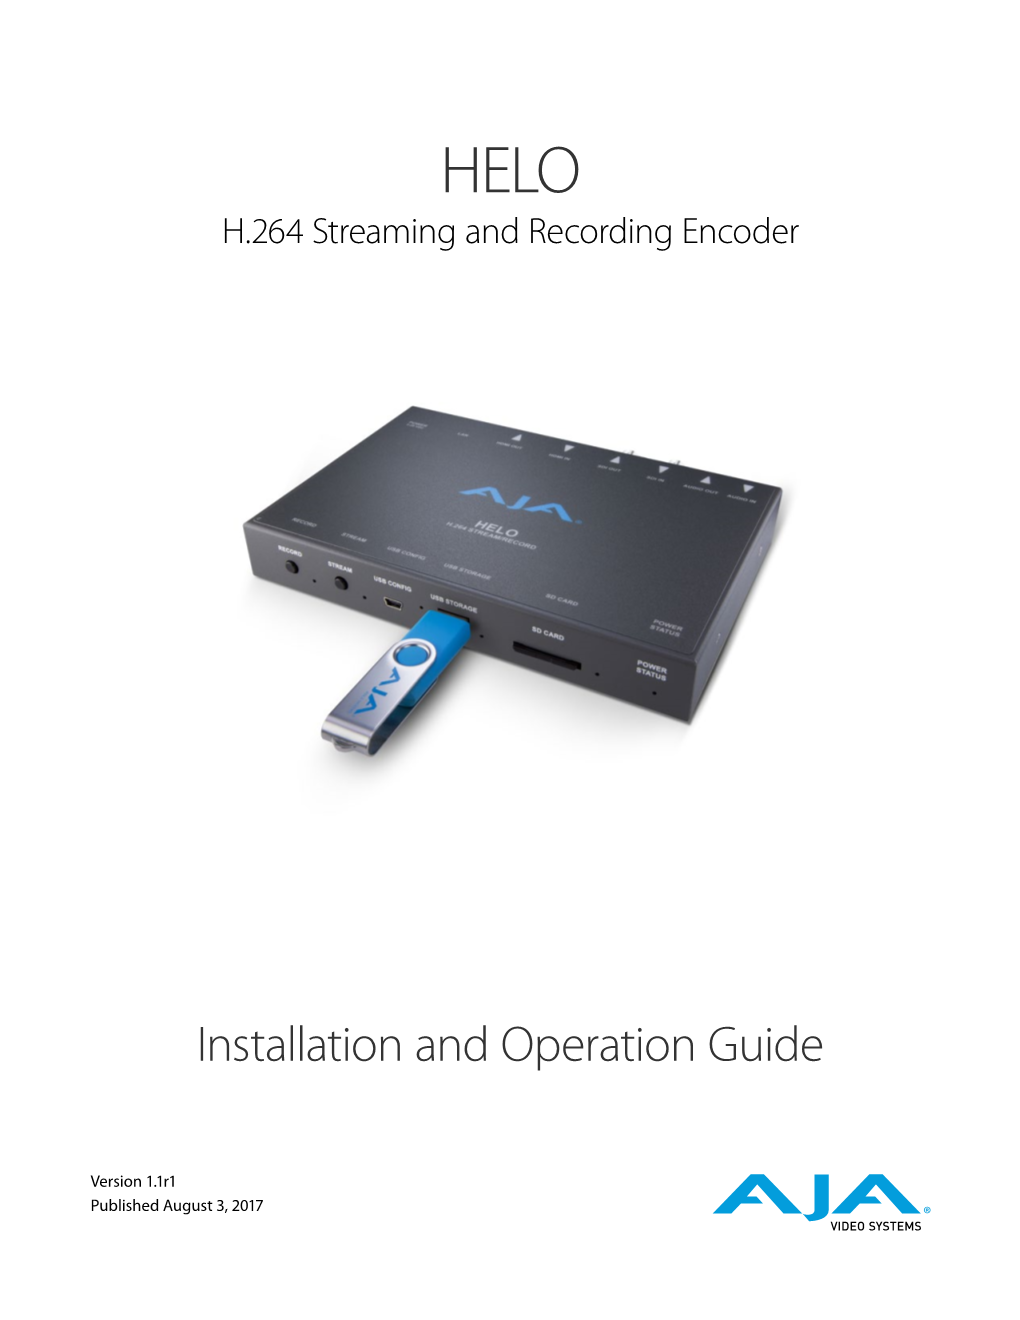 HELO H.264 Streaming and Recording Encoder